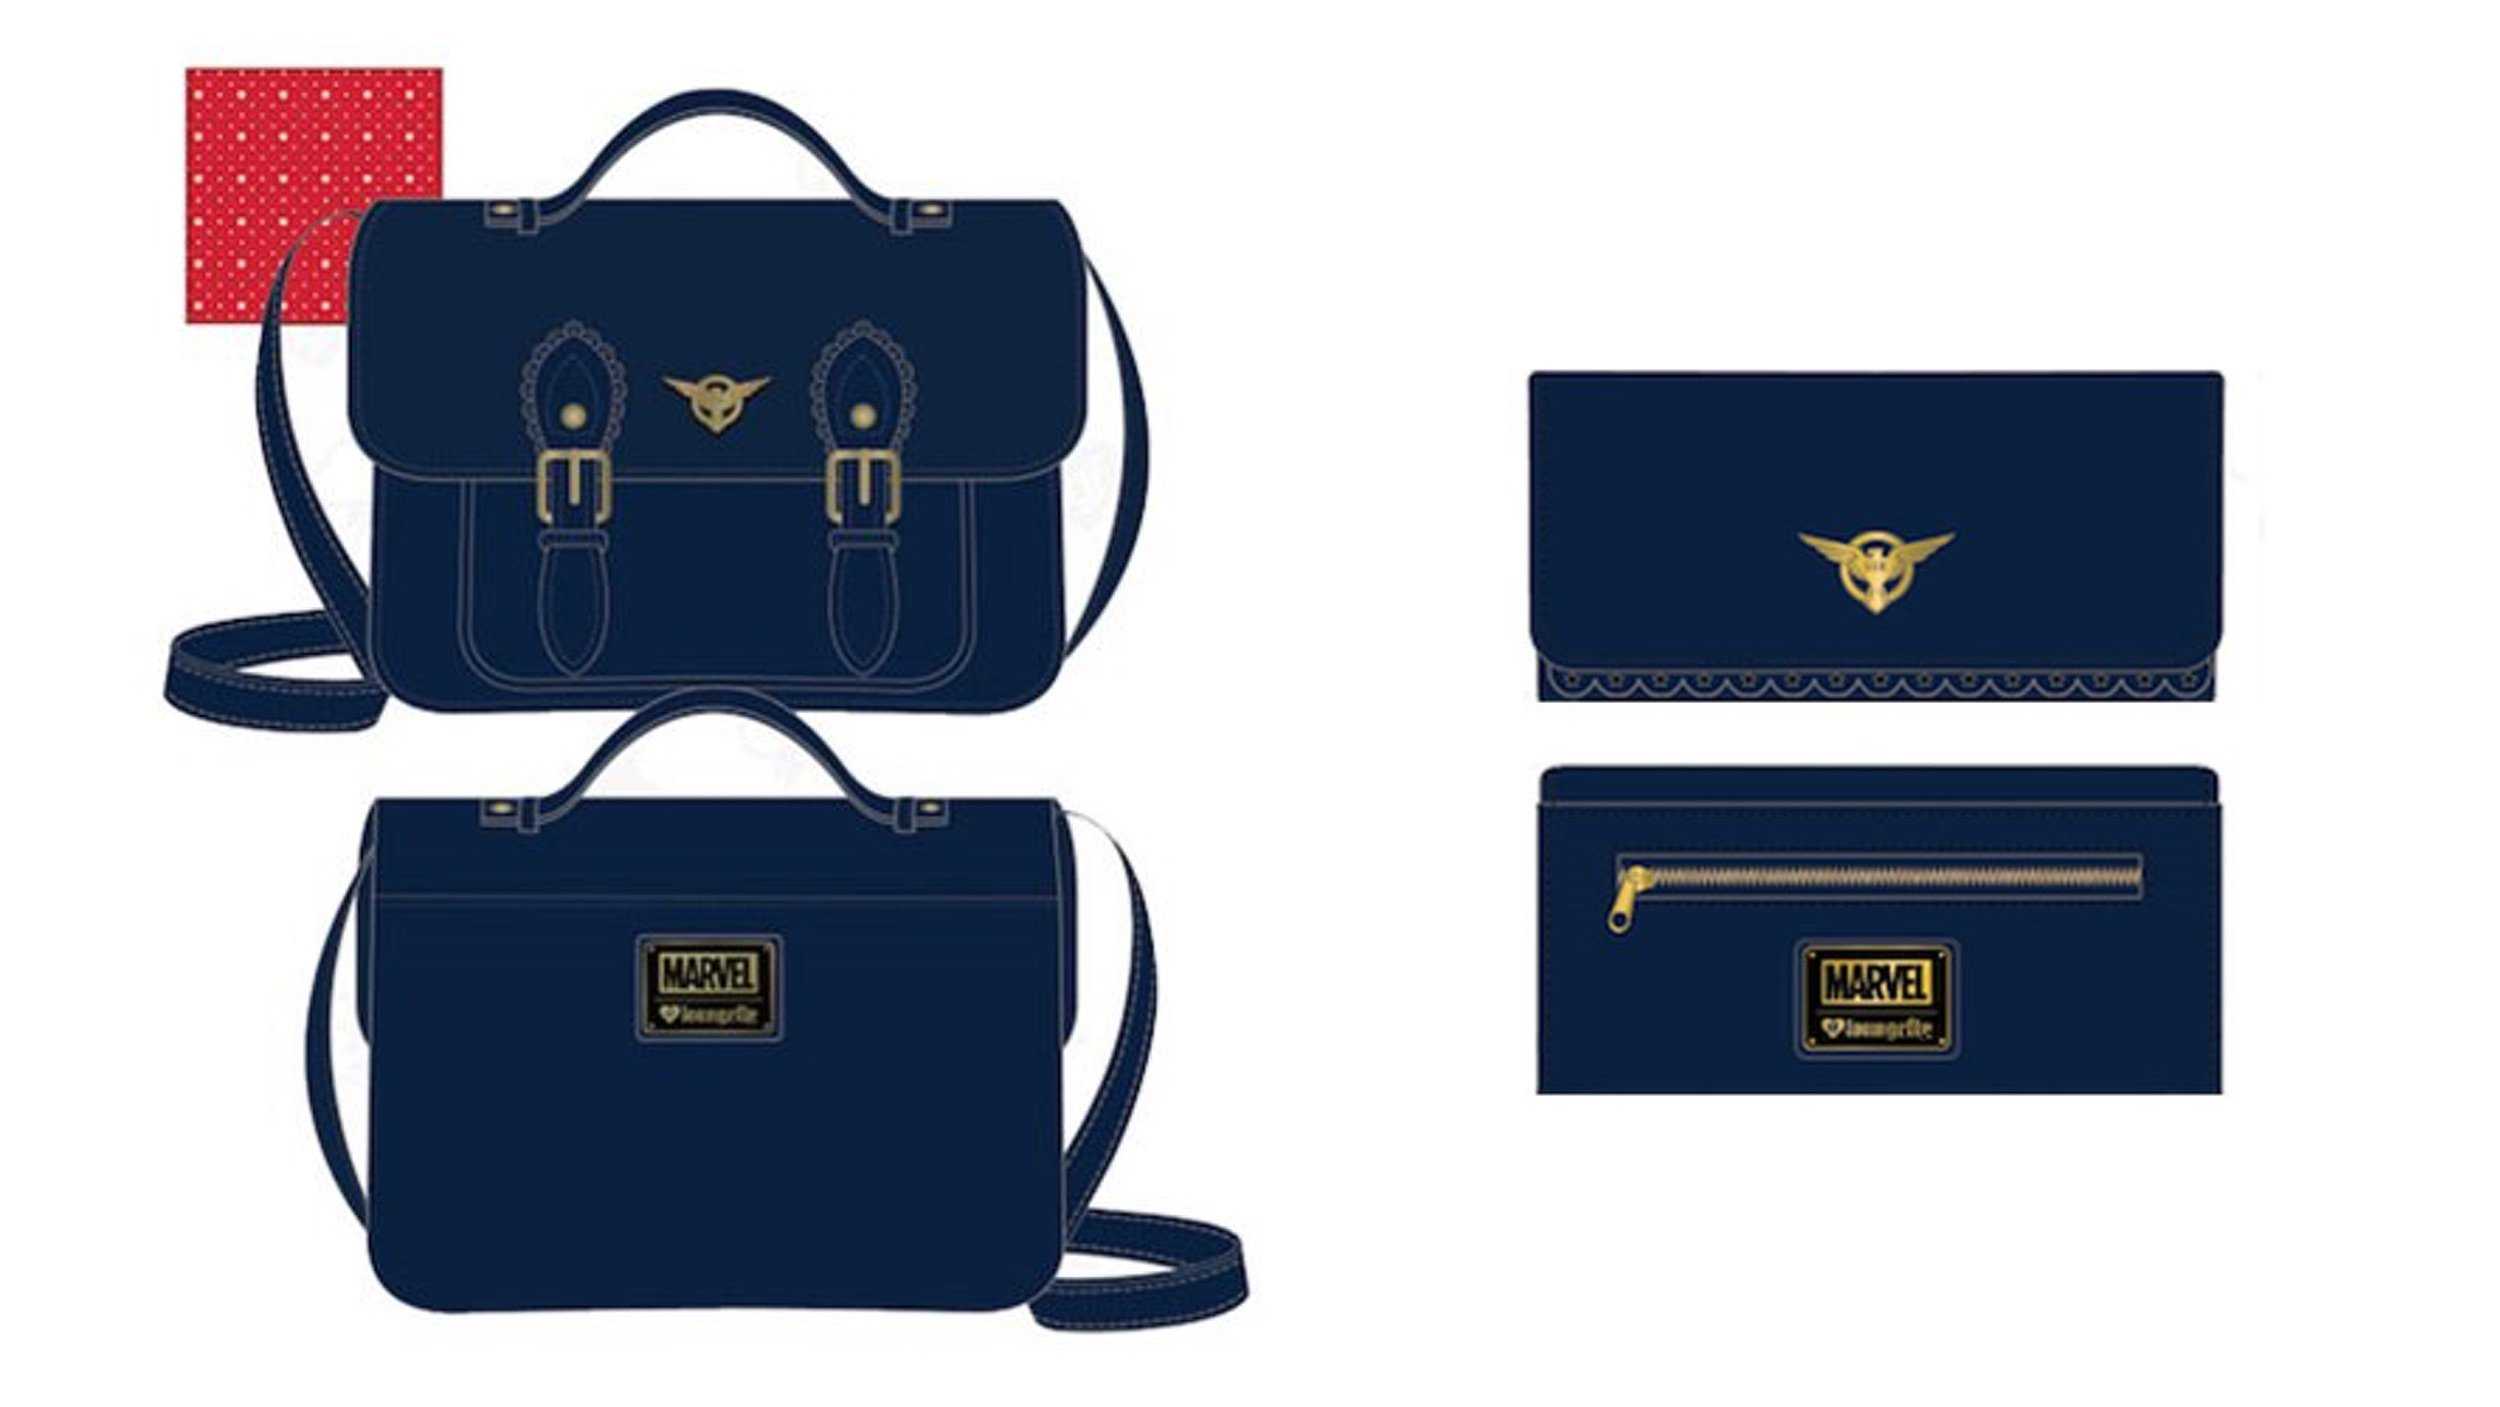 vamers-geekosphere-lifestyle-fashion-these-gorgeous-loungefly-bags-are-inspired-by-marvel-heroines-loungefly-bag-and-purse-inspired-by-peggy-carter